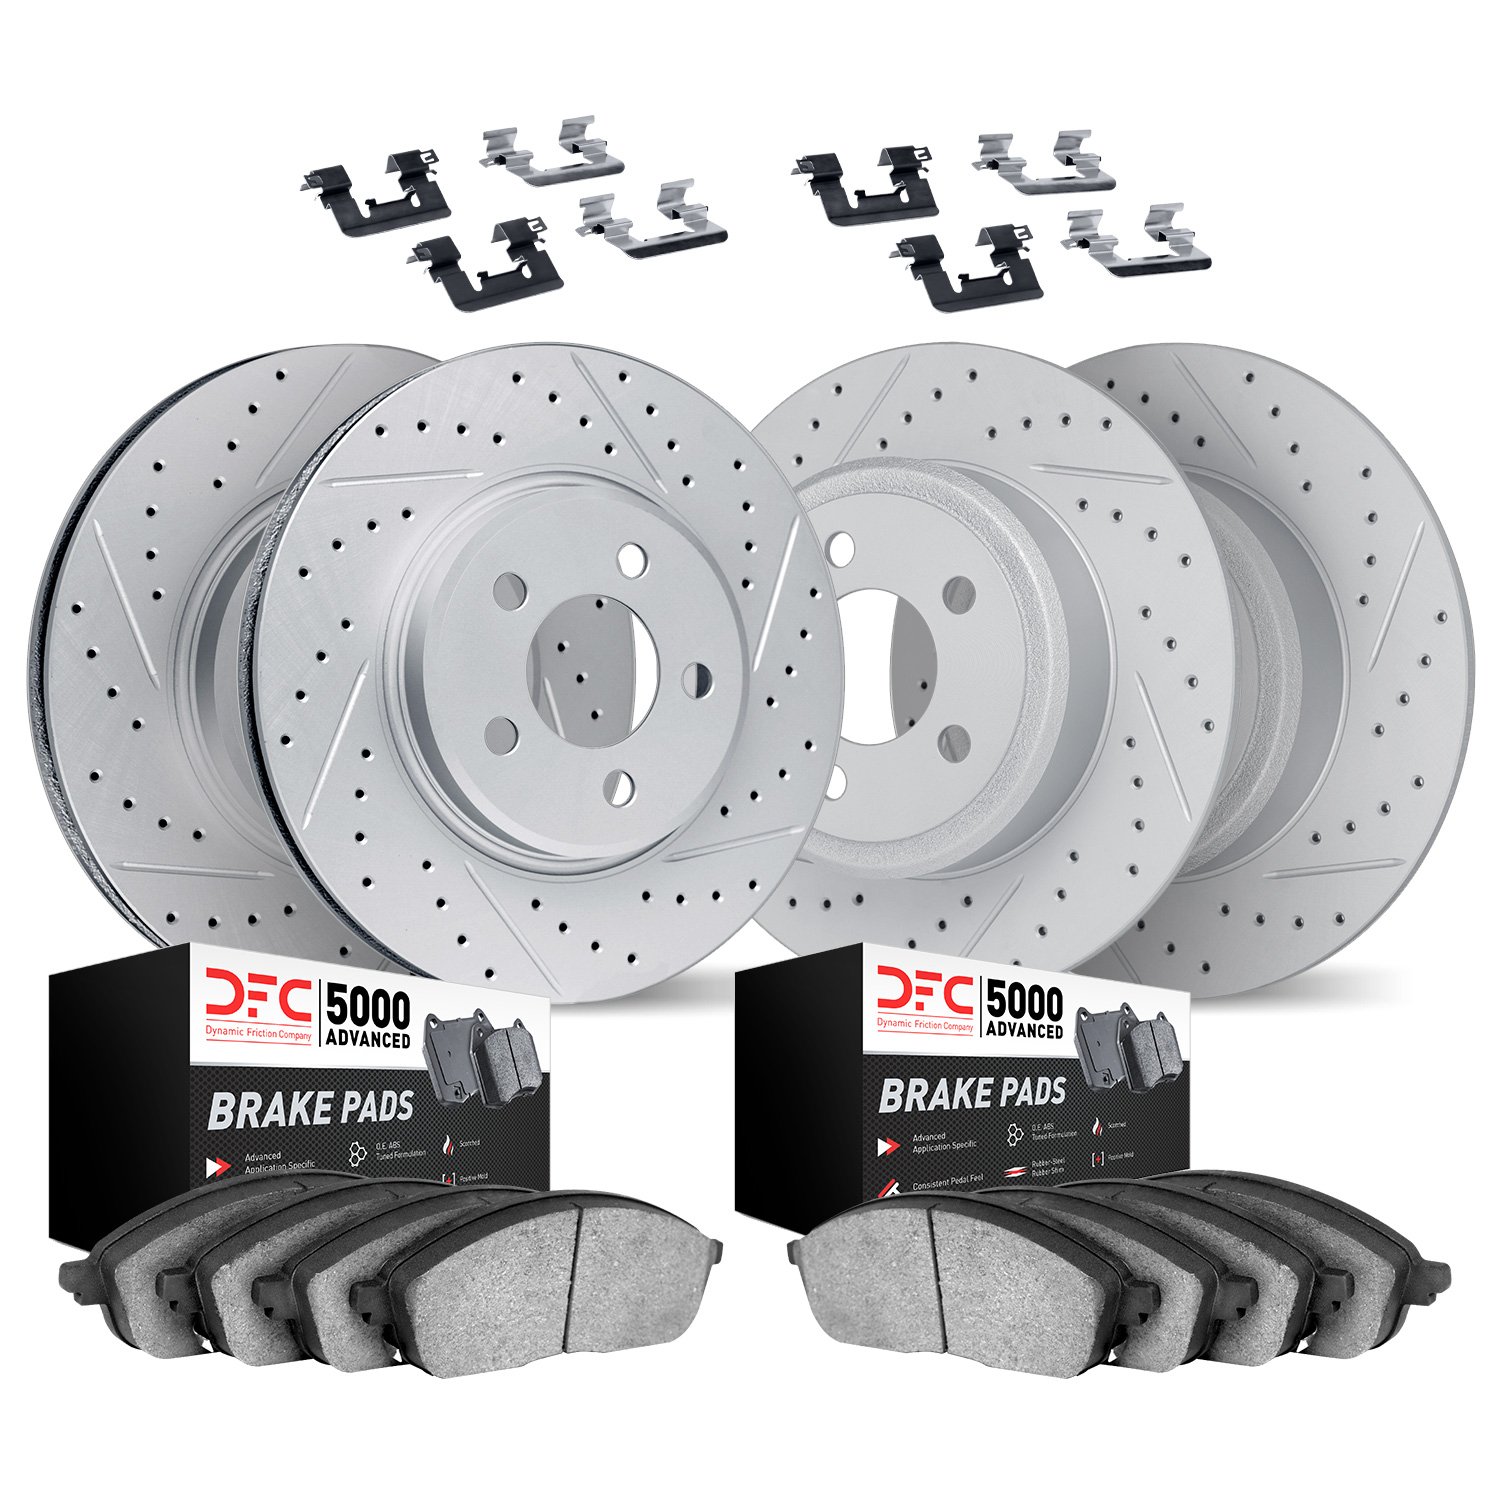 2514-59043 Geoperformance Drilled/Slotted Rotors w/5000 Advanced Brake Pads Kit & Hardware, 2020-2021 Acura/Honda, Position: Fro